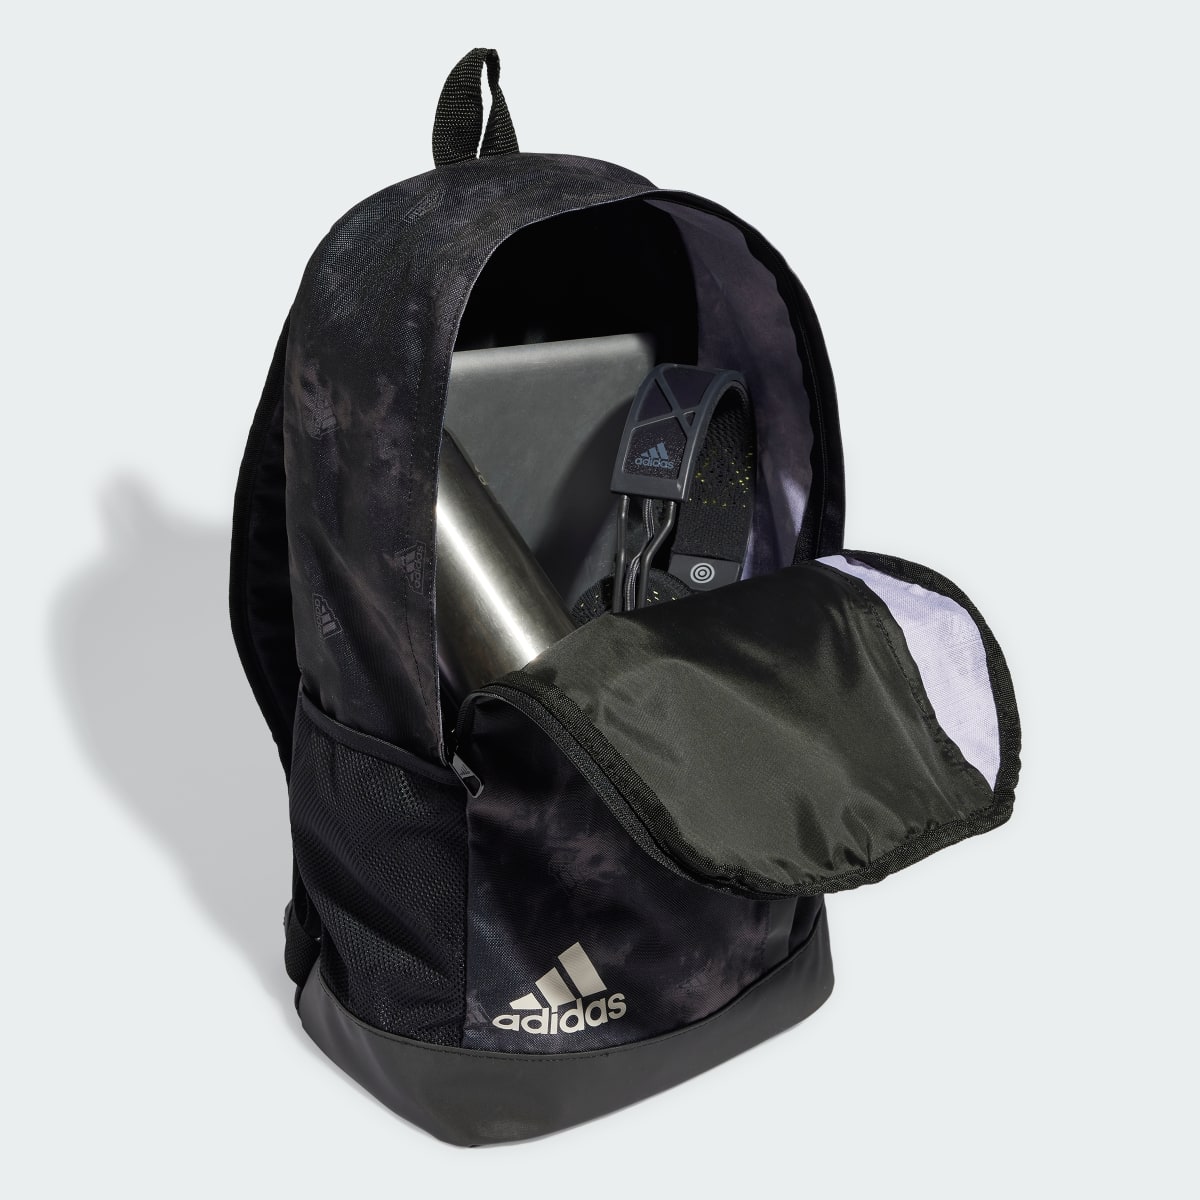 Adidas Linear Graphic Backpack. 5